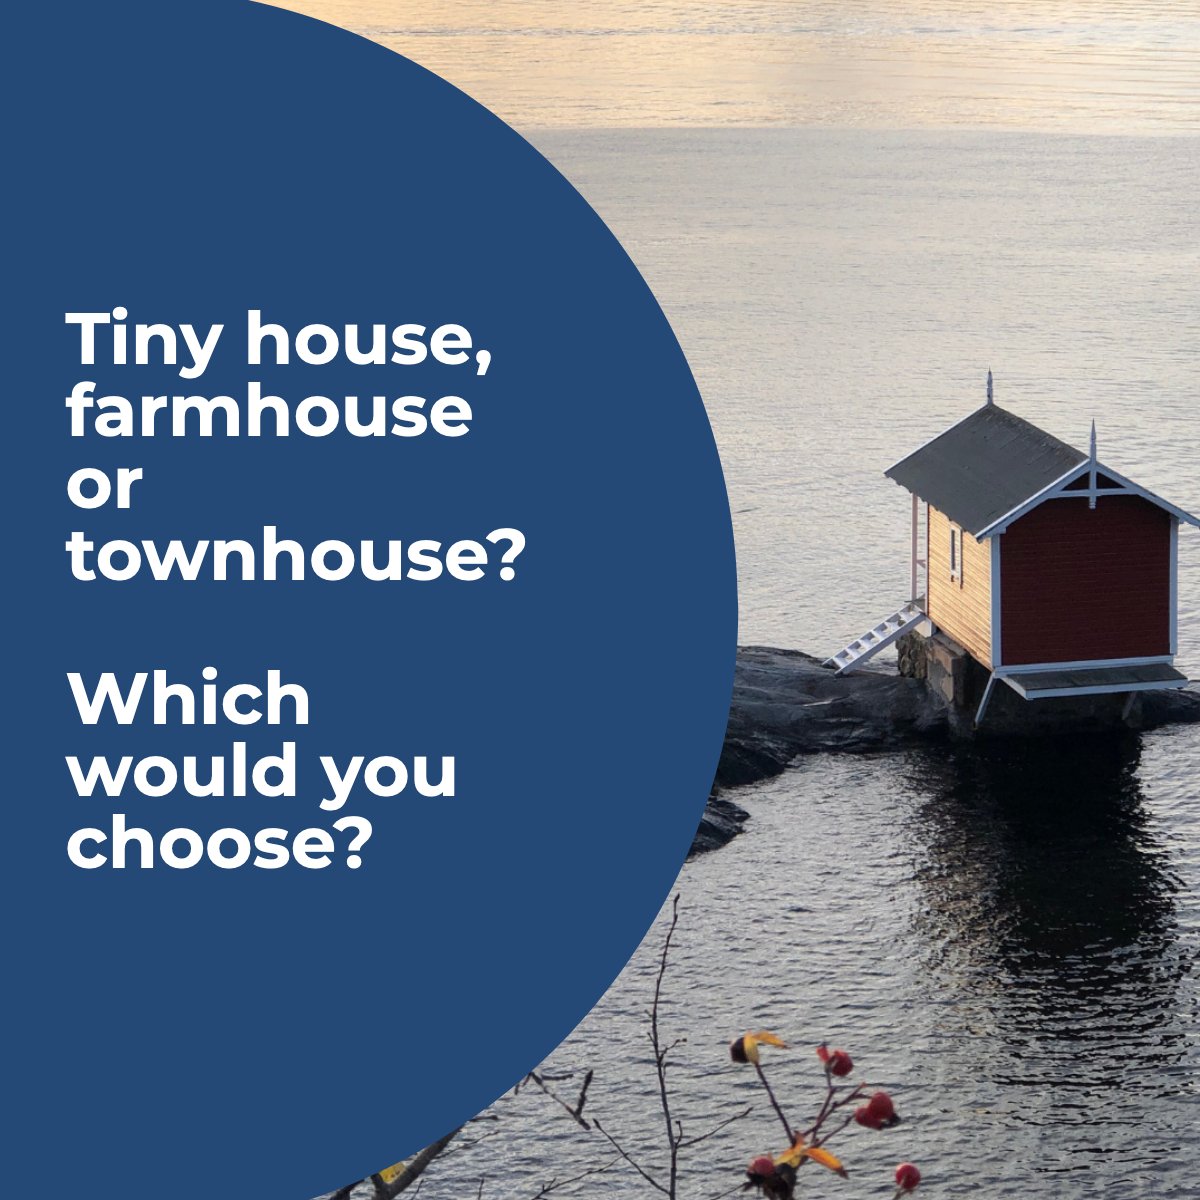 Tiny house, farmhouse, or townhouse? 🏘

Which would you choose? 🤔

#typeofhouse #housetype #realestate #question #tinyhouse #farmhouse #townhouse
 #brokerjones #Flossmoor #homewood #homewoodflossmoor #district233 #manifesthomes #FSBO #FreeCMA #fixandflip